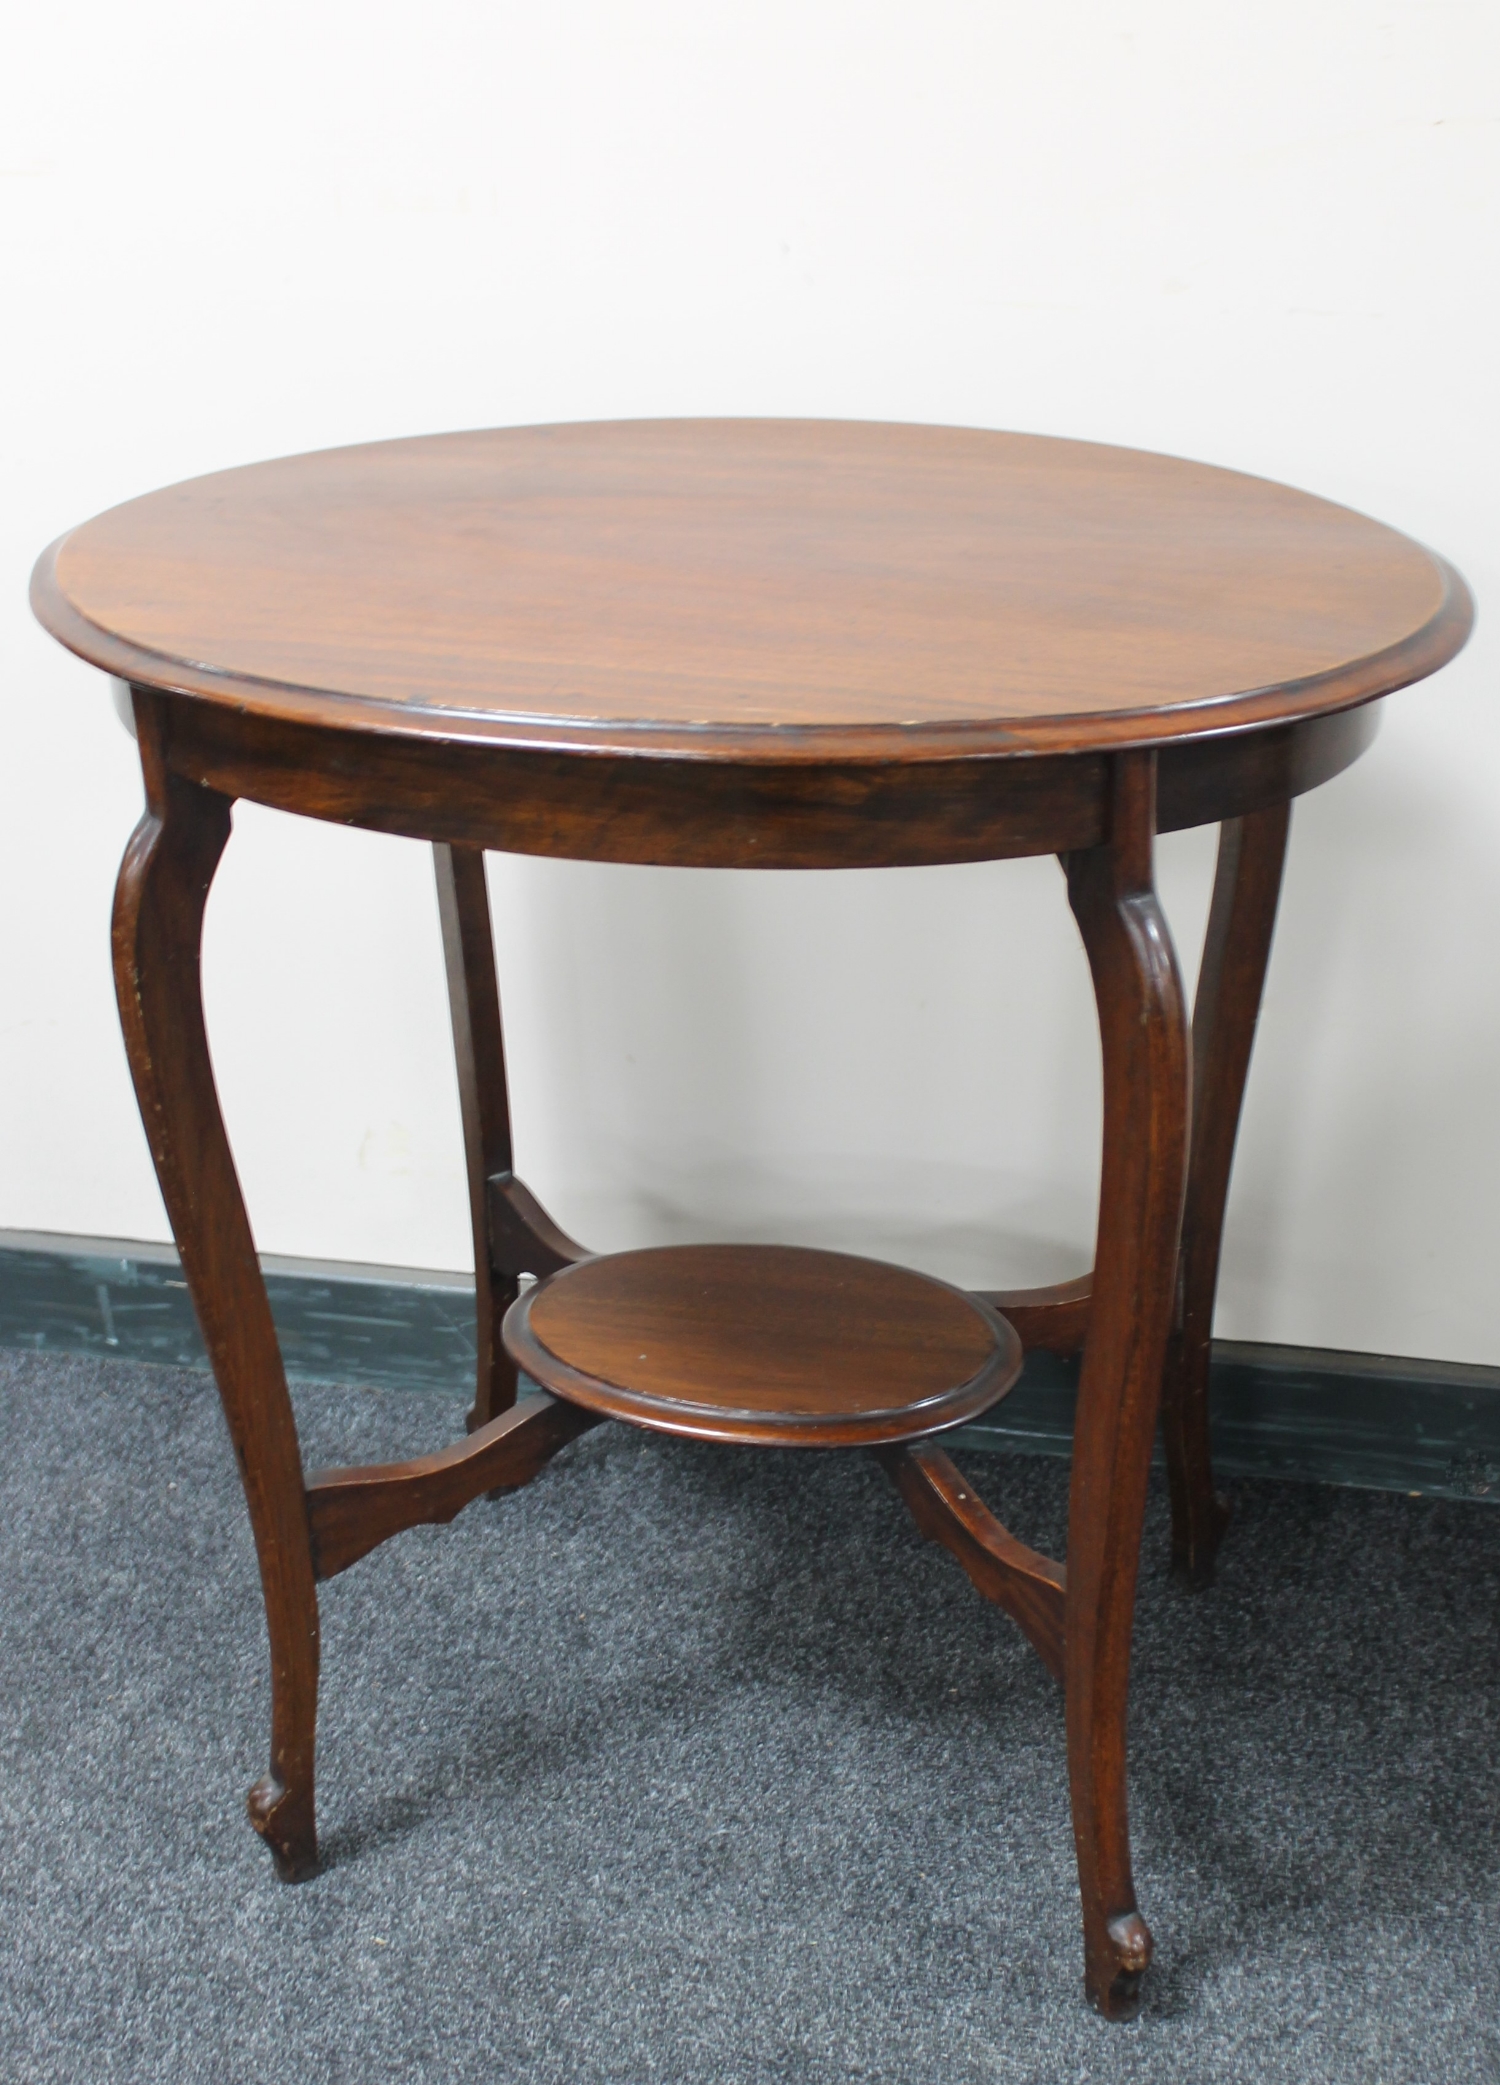 An Edwardian mahogany oval occasional table